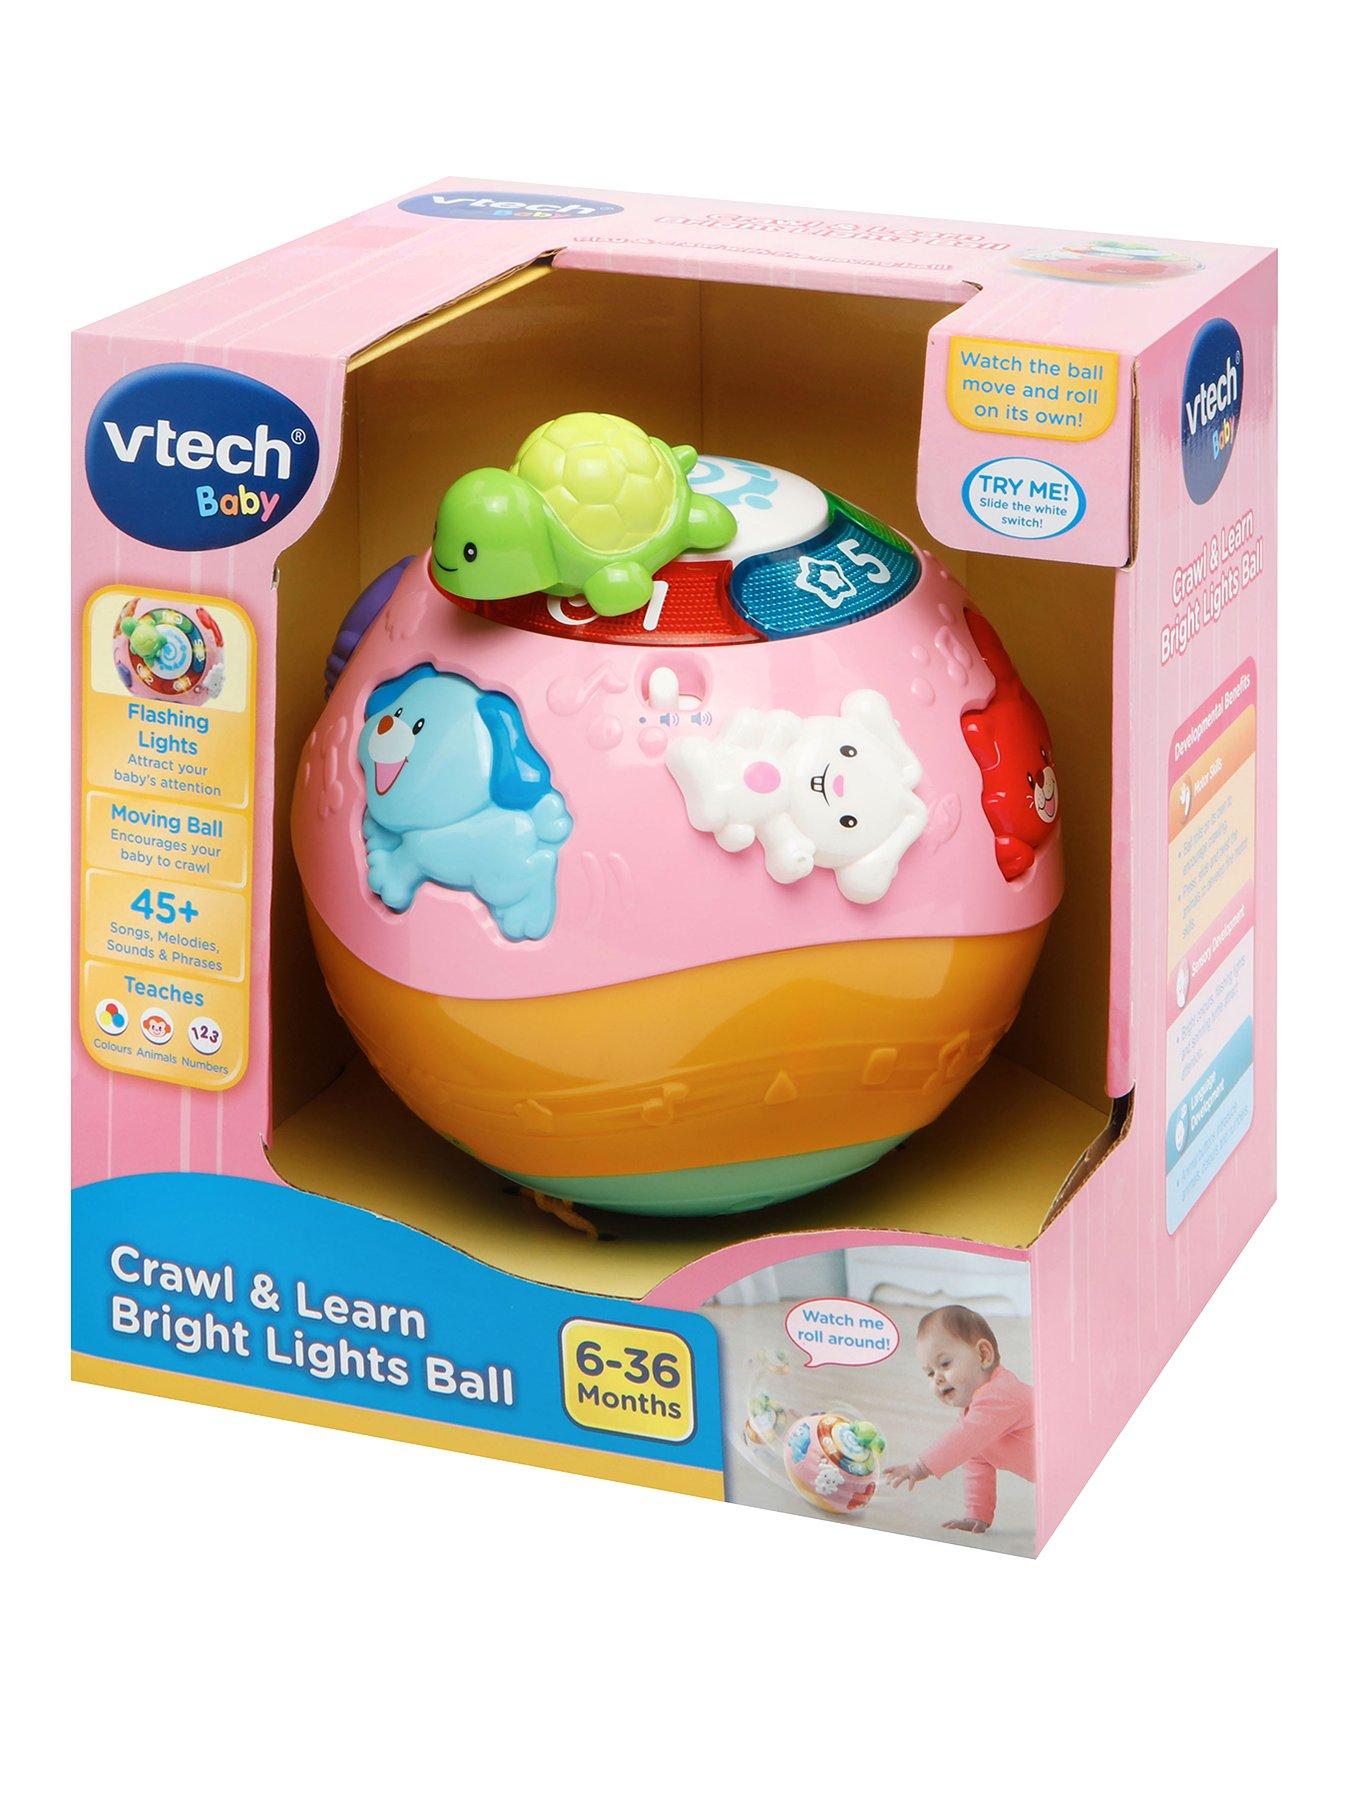 vtech learn to crawl ball